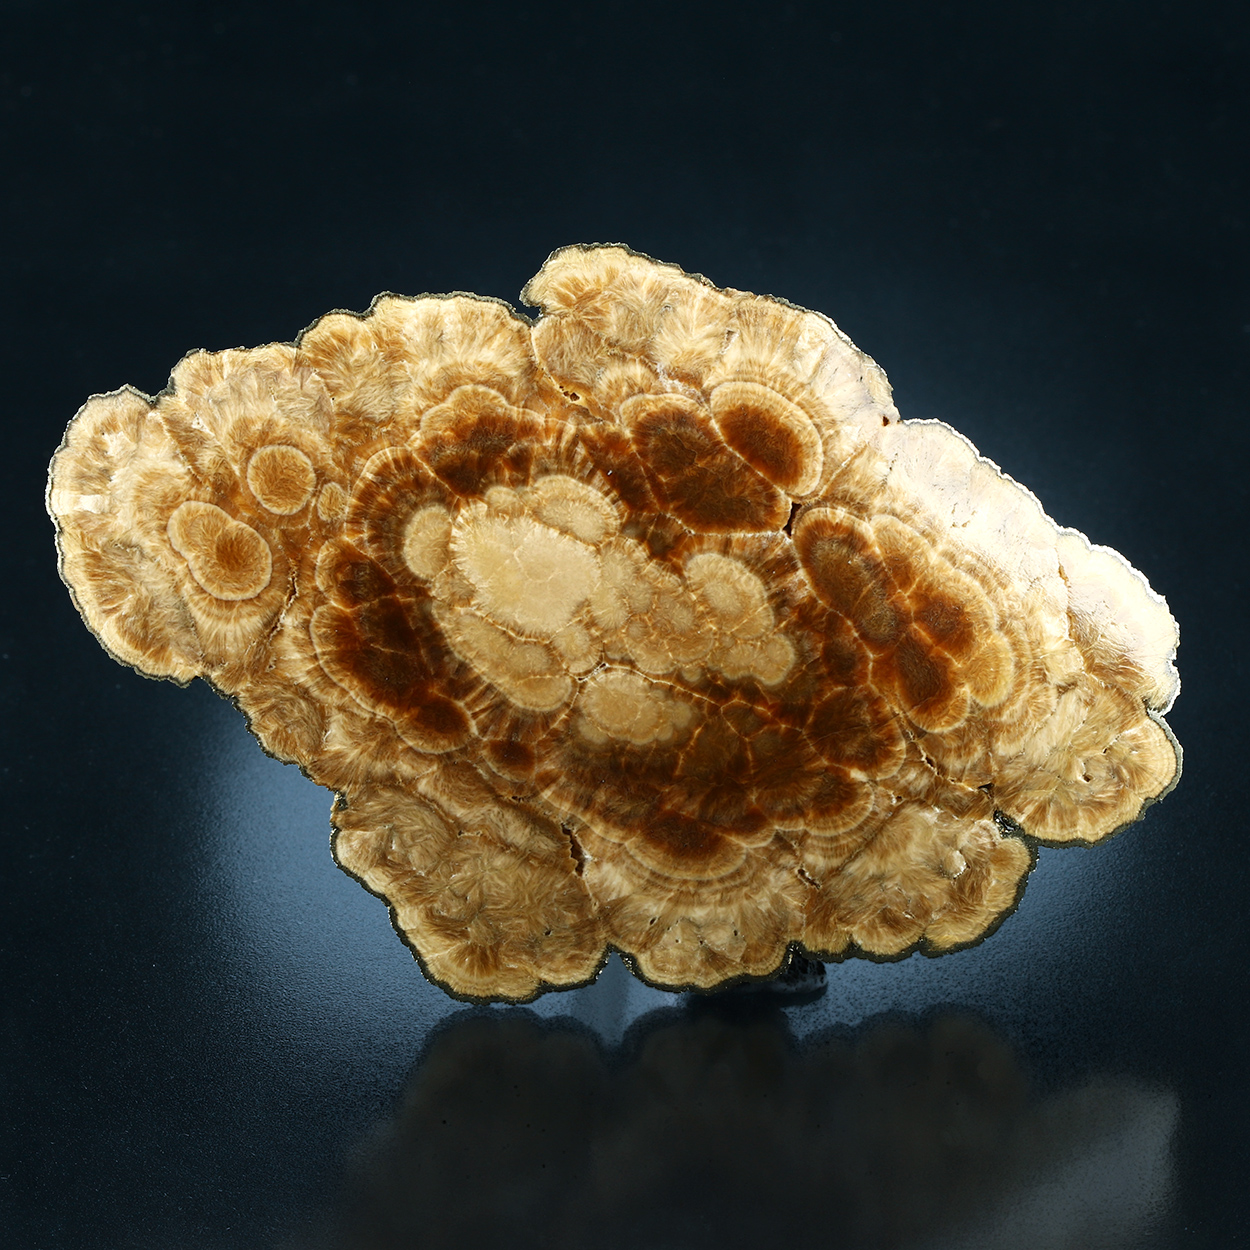 Baryte With Marcasite